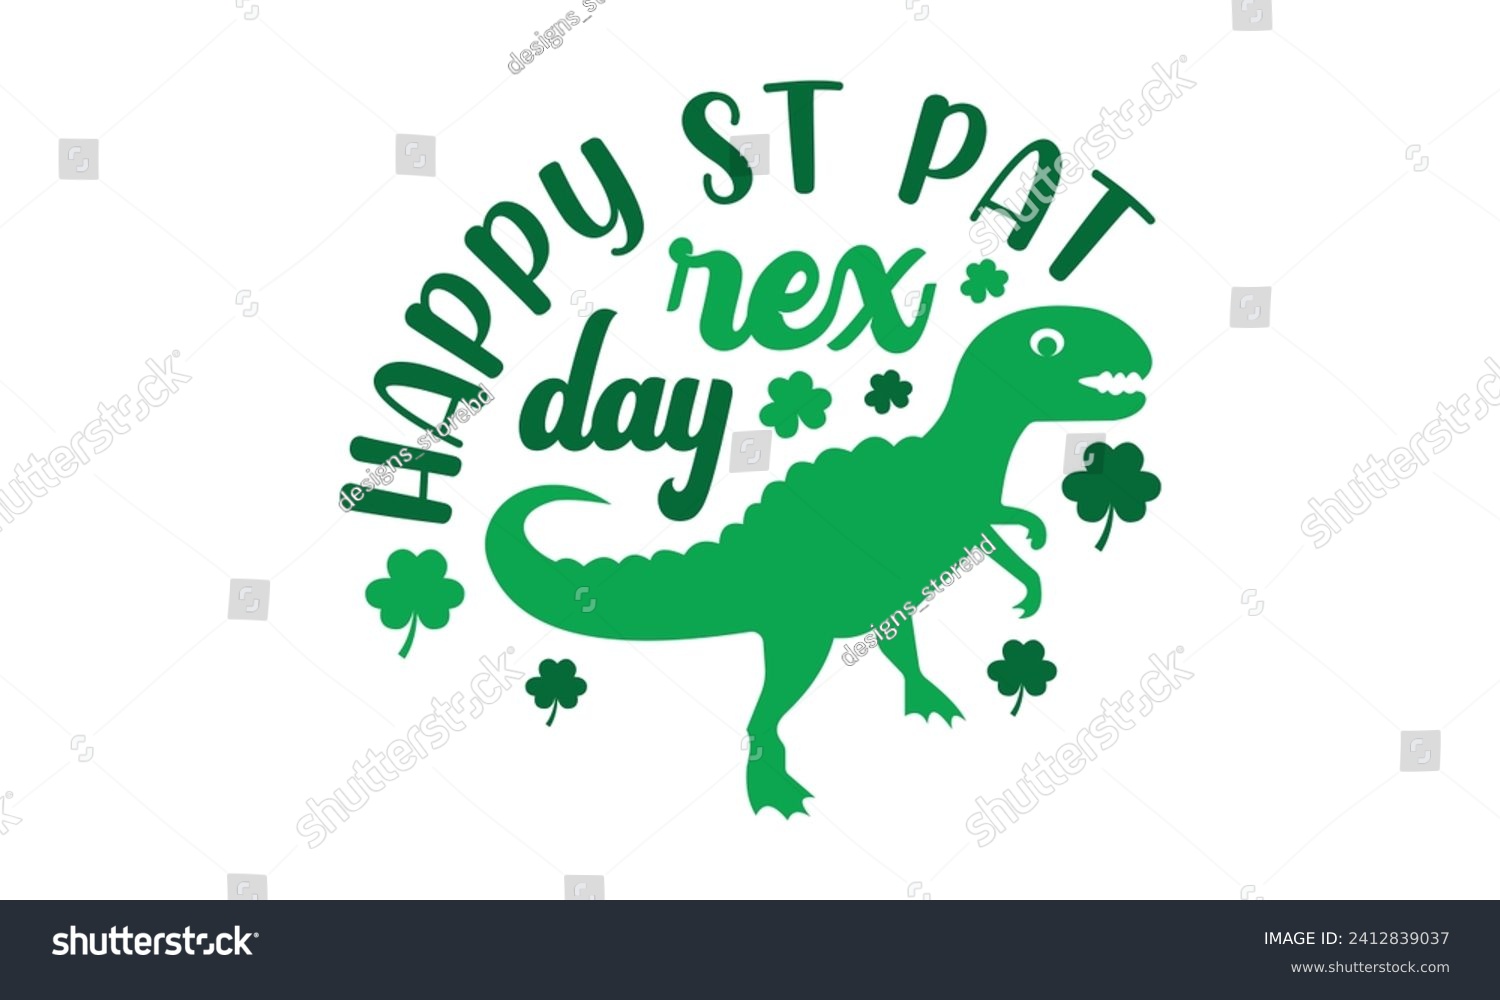 SVG of Happy st pat-rex day,St. Patrick's Day,St. Patrick's Day t shirt,Retro St. Patricks,Shamrock Svg,Happy Happy St. Patrick's Day typography t shirt quotes,Cricut Cut Files,Silhouette,vector svg